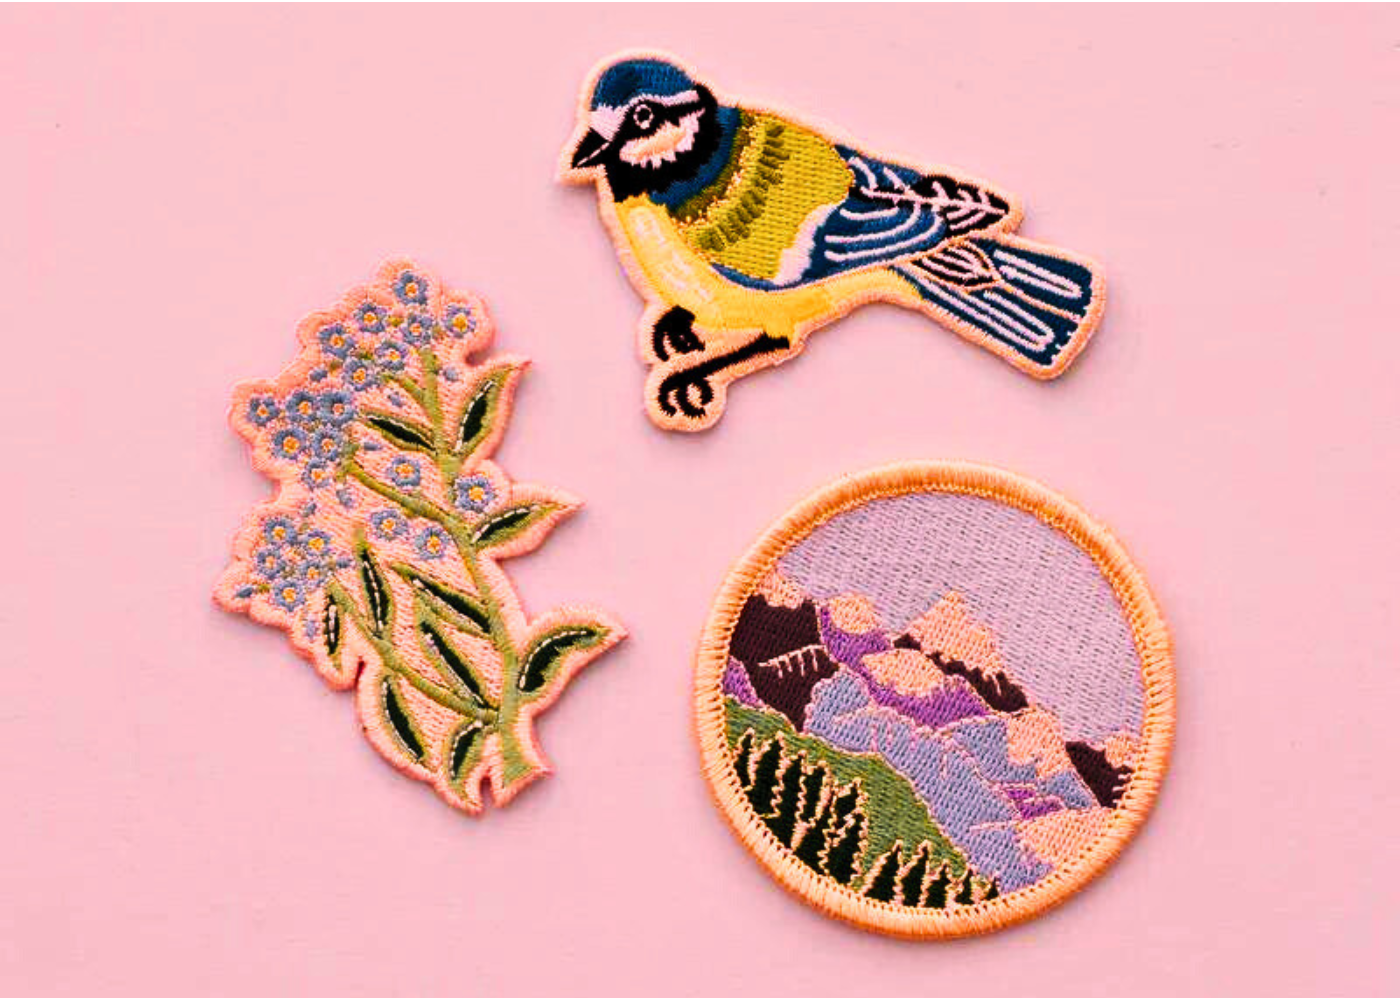 What Are Embroidery Patches?